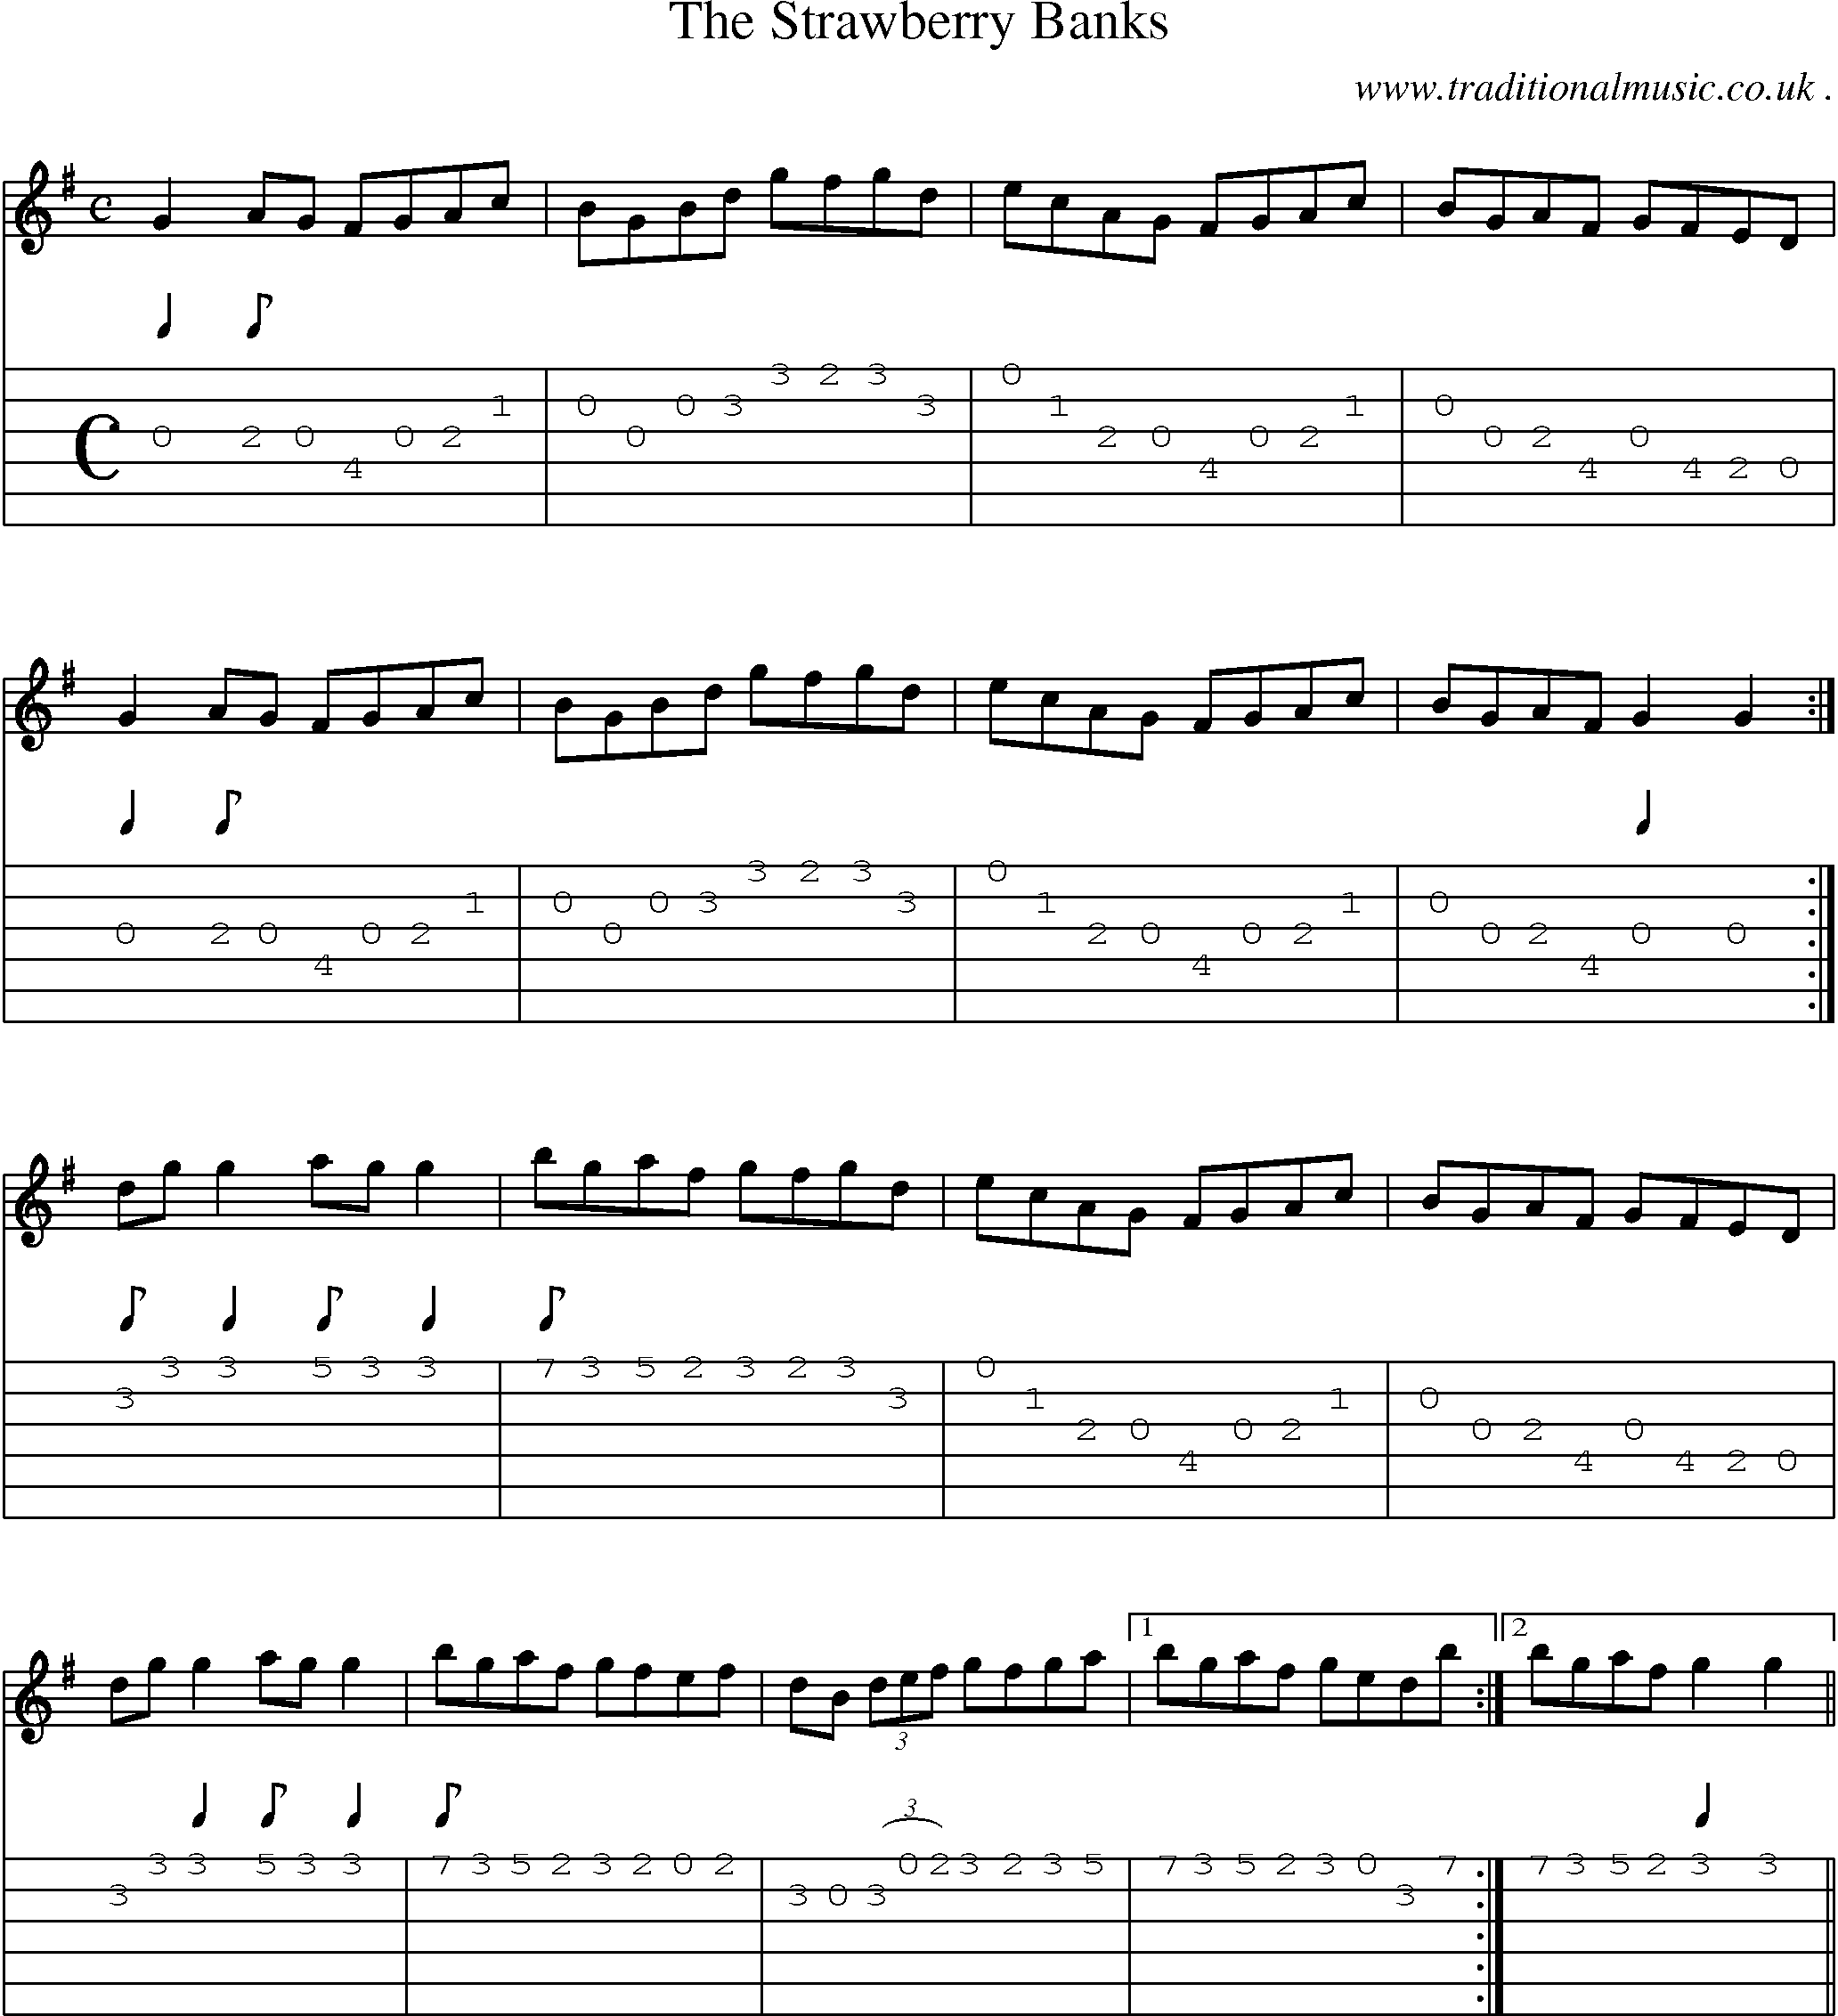 Sheet-Music and Guitar Tabs for The Strawberry Banks